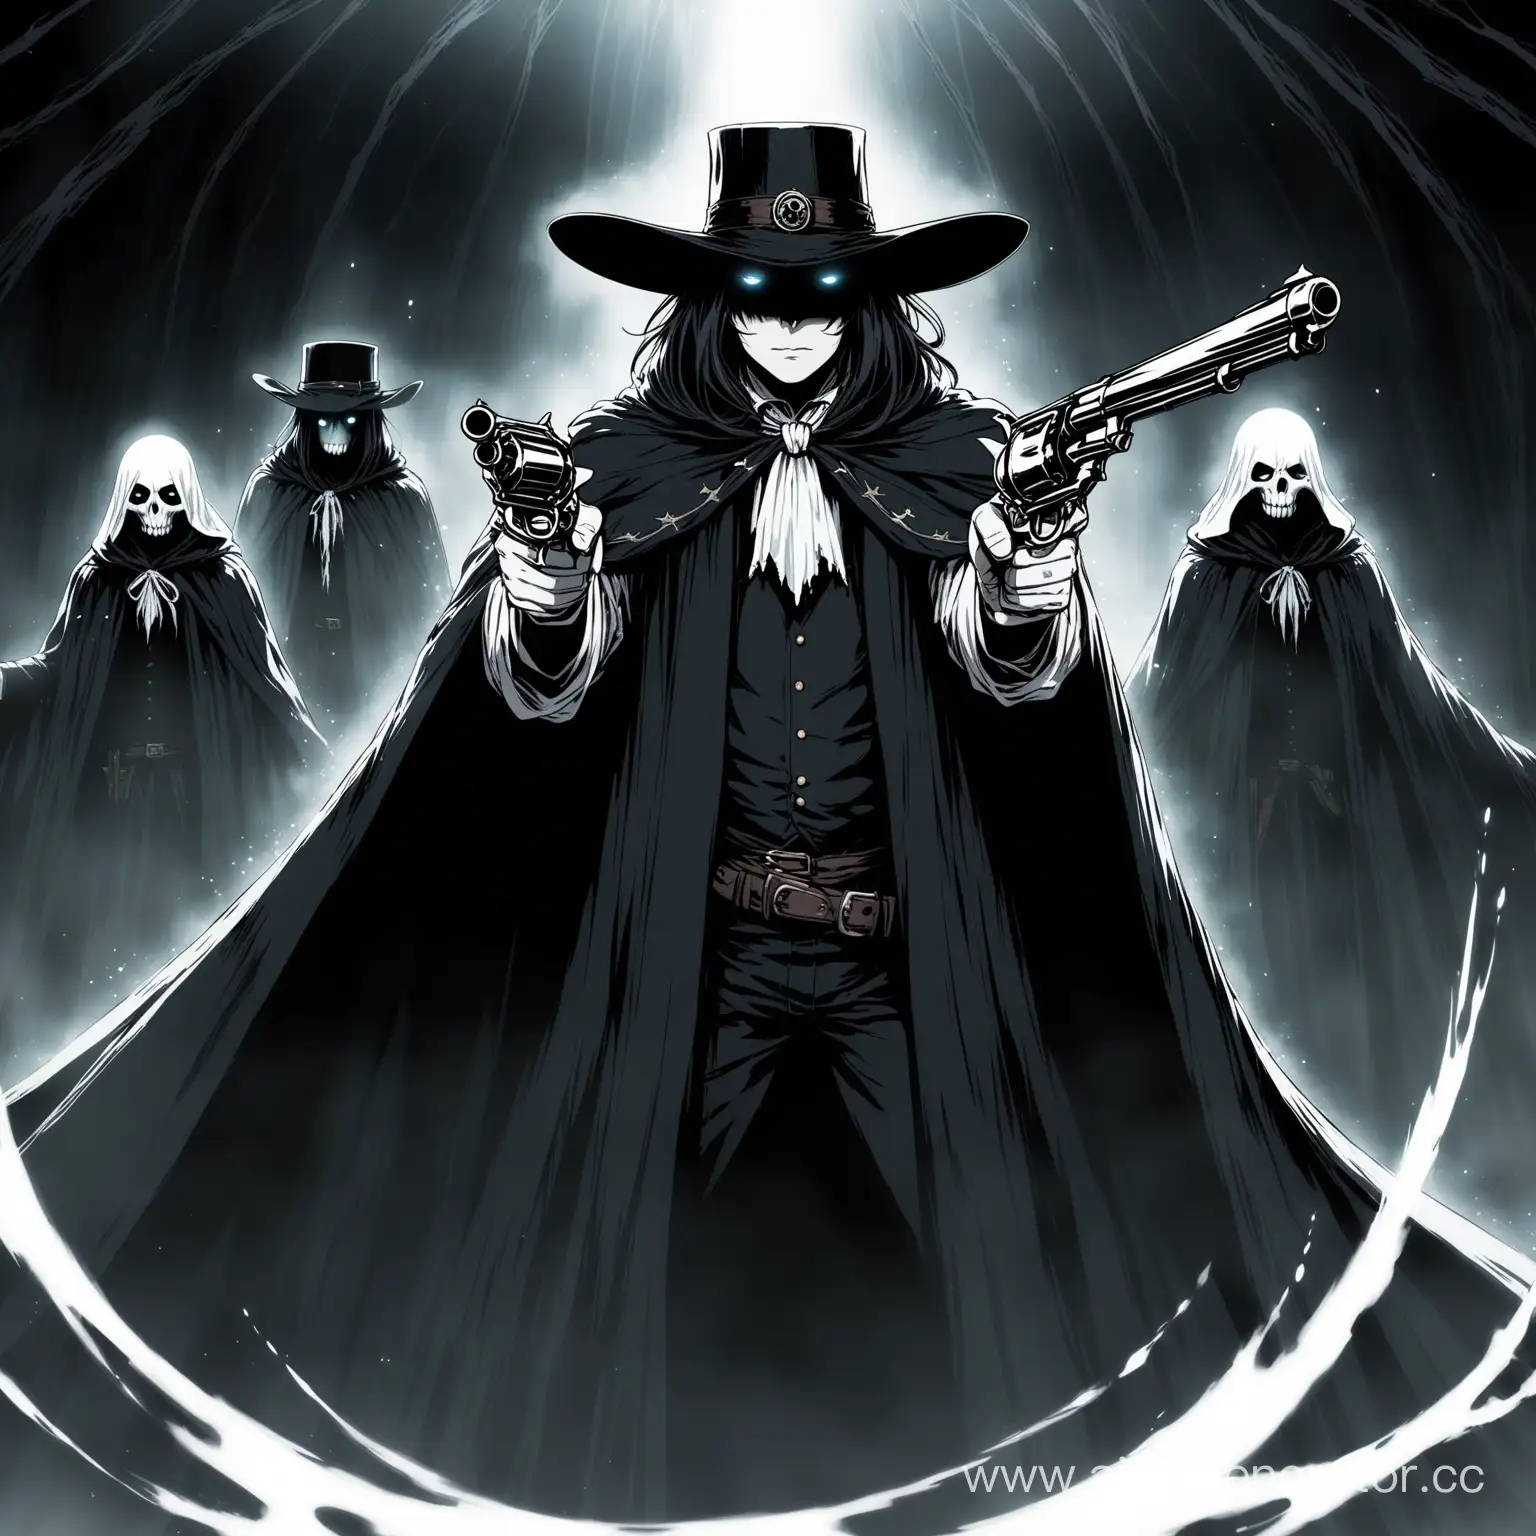 Mysterious-Figure-with-Twin-Revolvers-and-Glowing-Eyes-in-Shadowy-Cloak